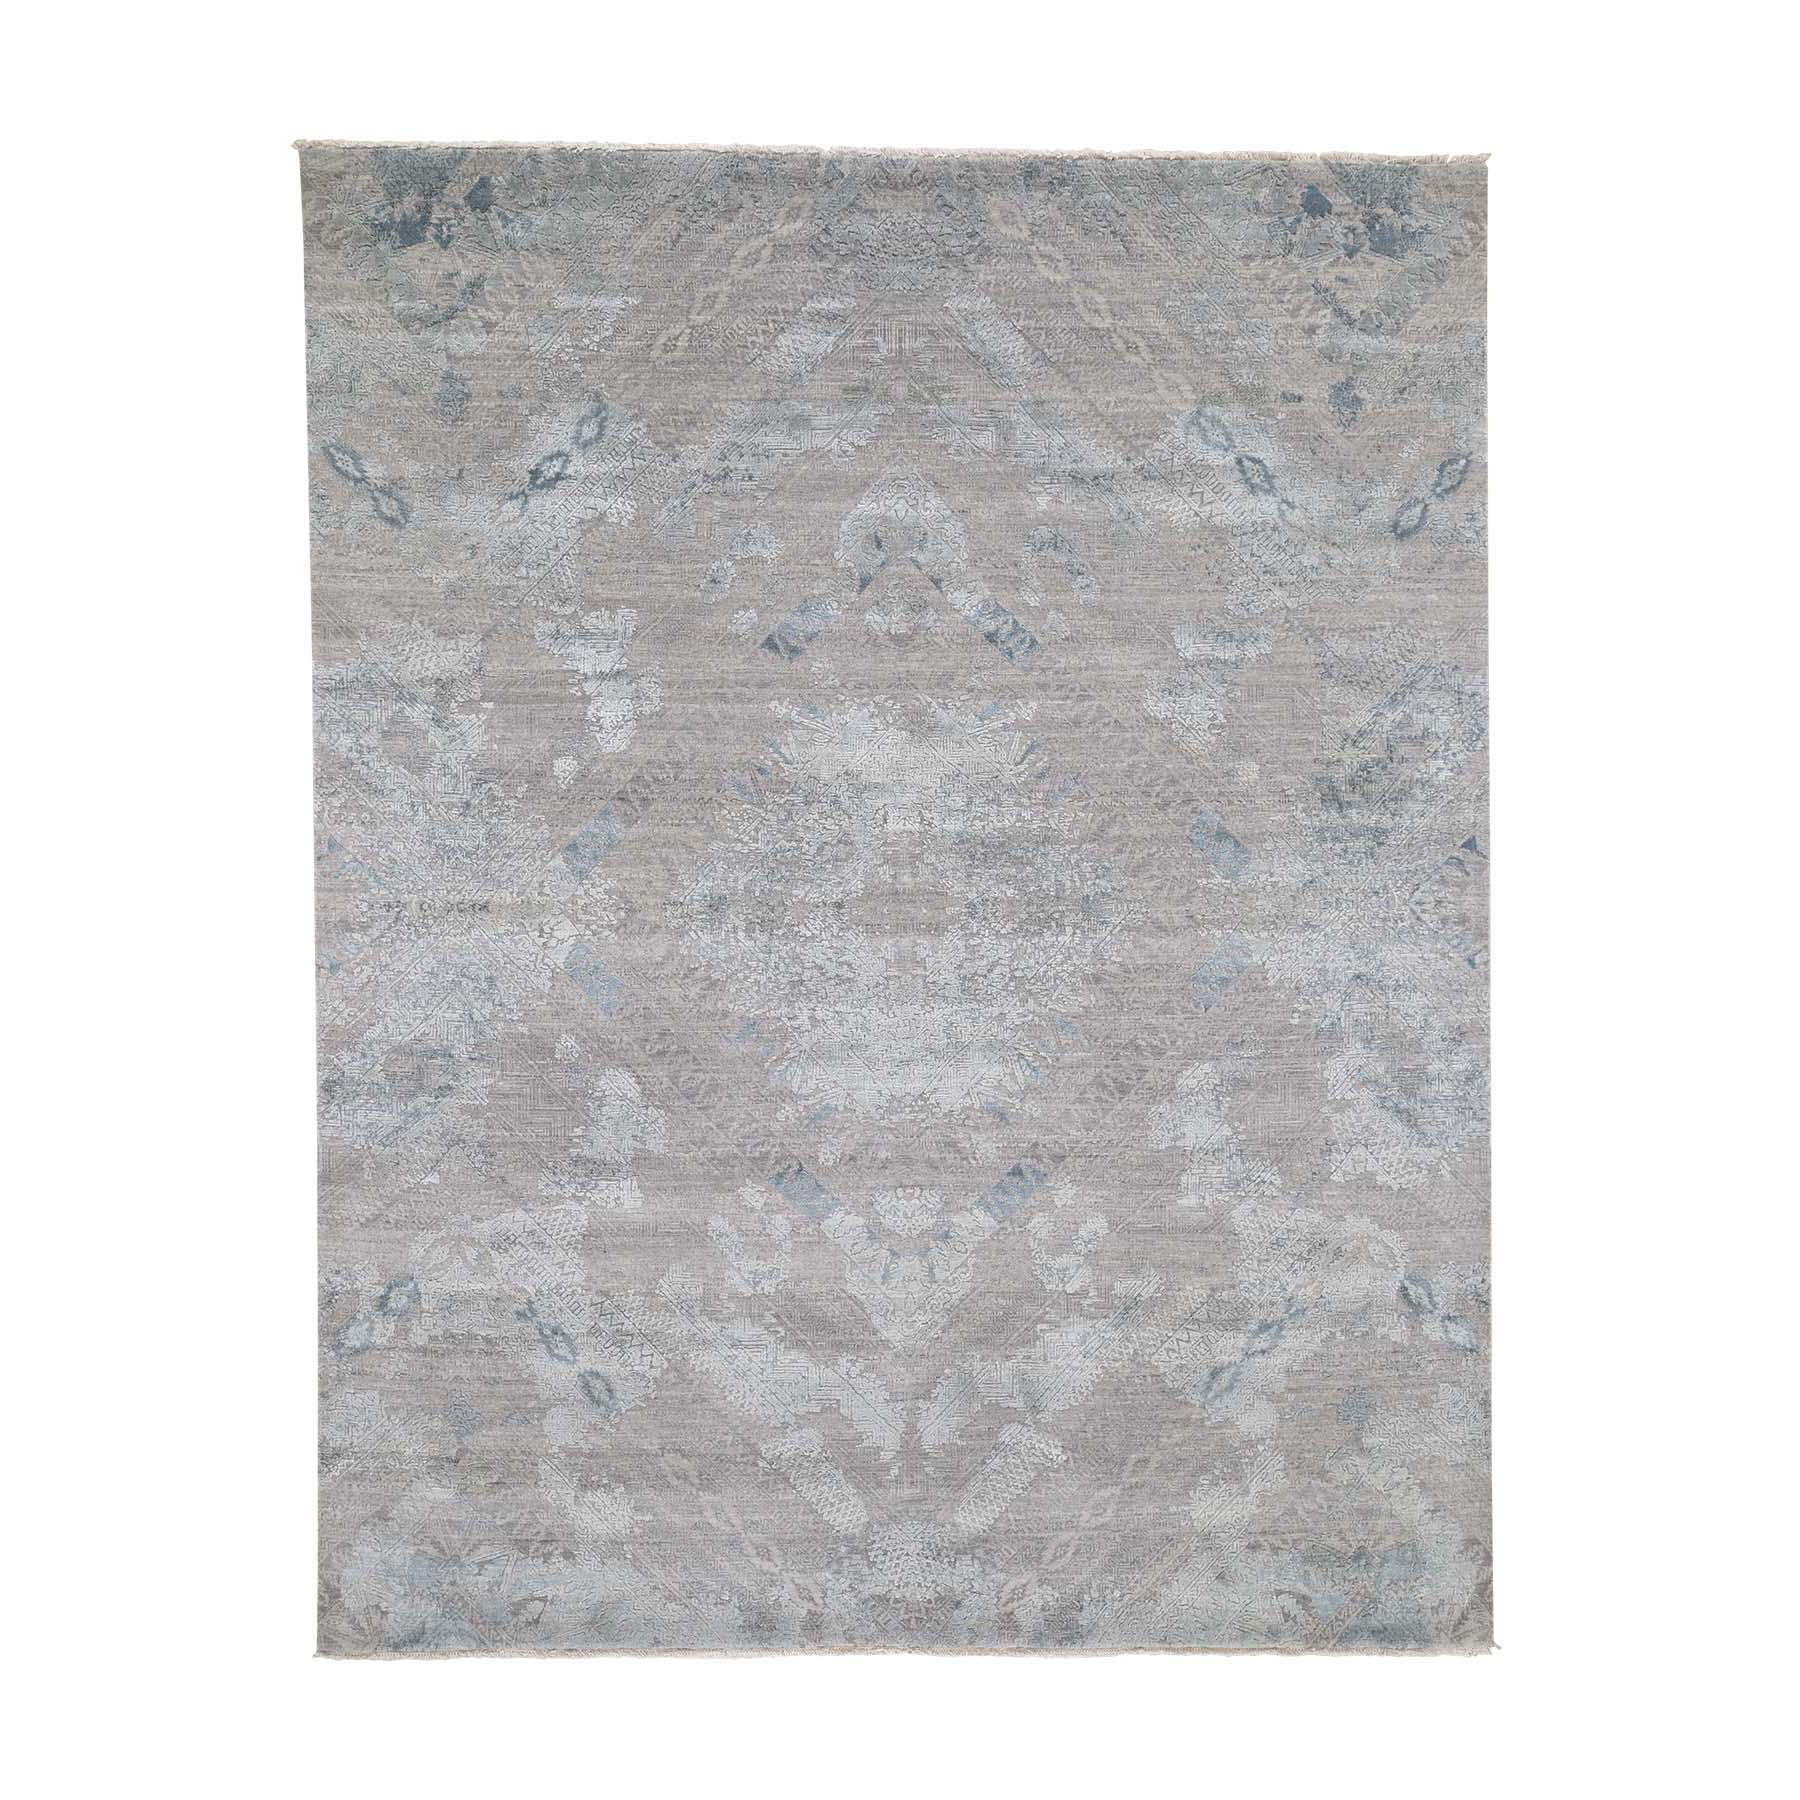 Wool and Silk Rugs LUV412641